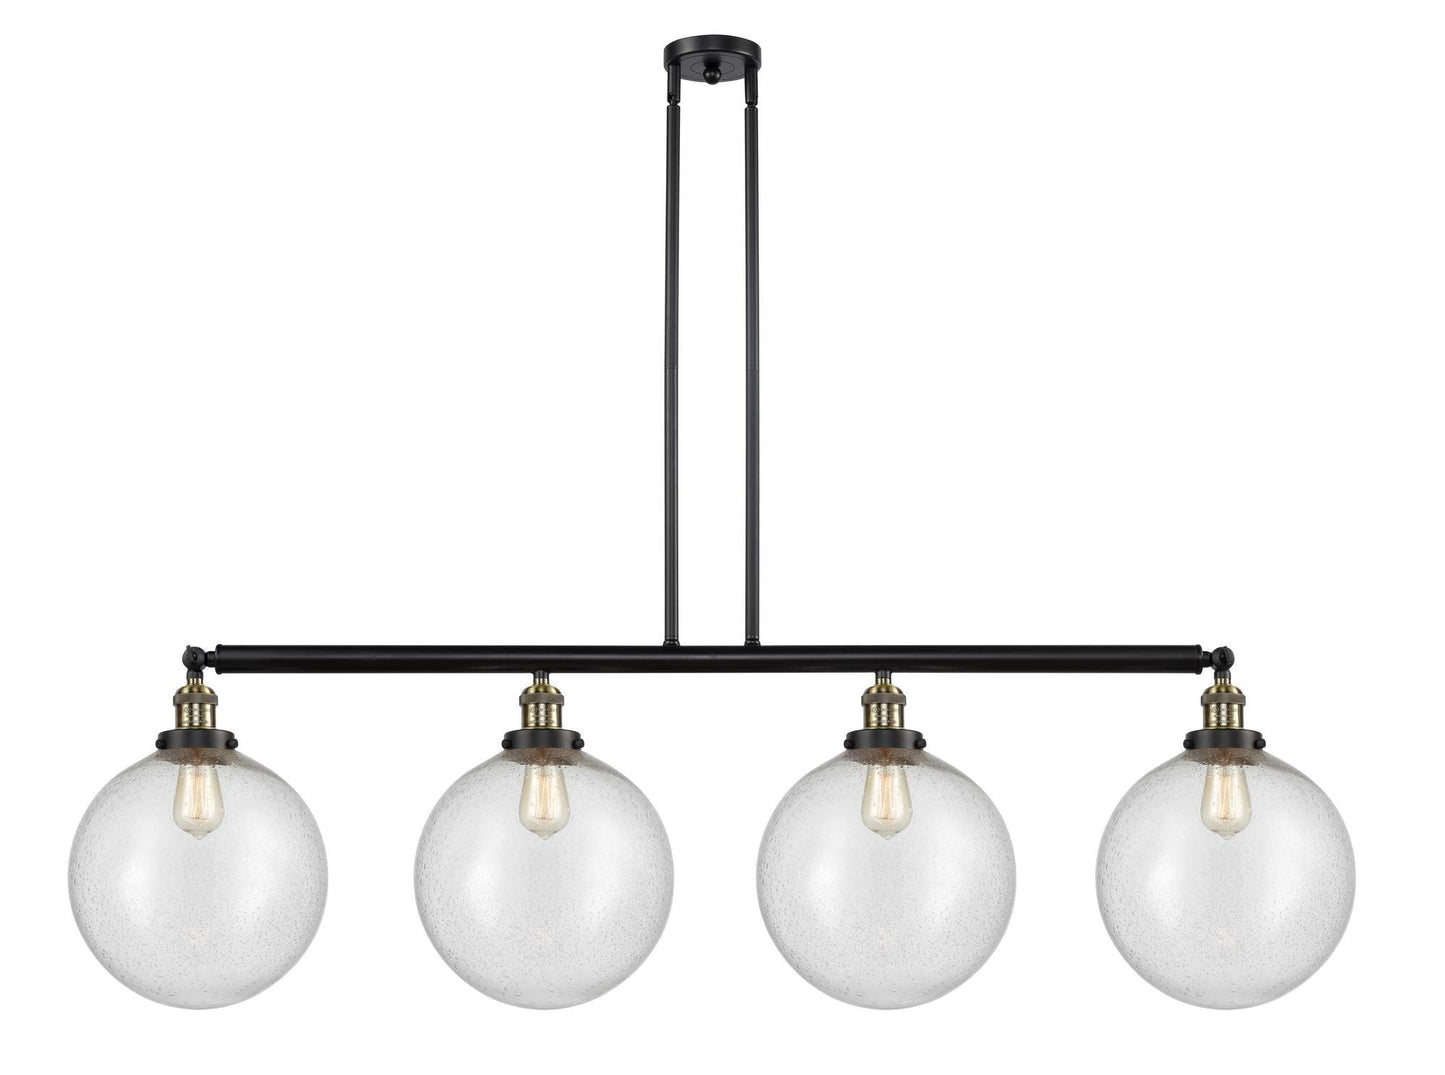 214-BAB-G204-12 4-Light 56" Black Antique Brass Island Light - Seedy Beacon Glass - LED Bulb - Dimmensions: 56 x 12 x 16<br>Minimum Height : 26<br>Maximum Height : 50 - Sloped Ceiling Compatible: Yes